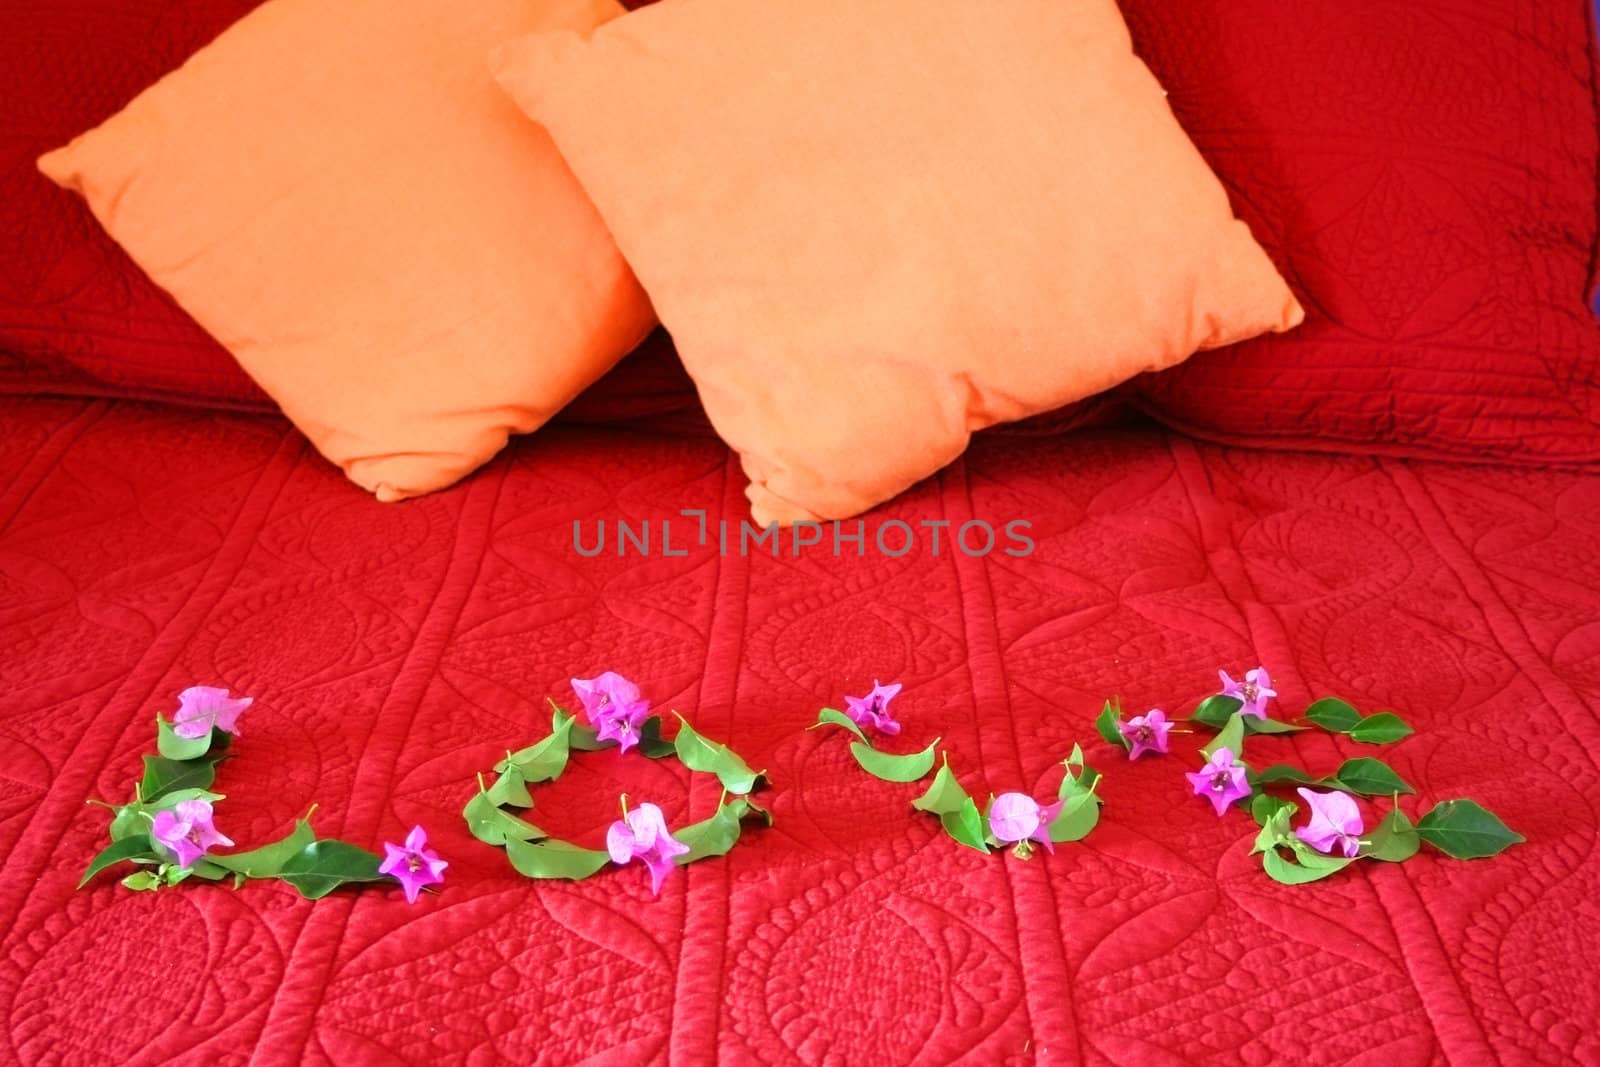 Love spelled out with flowers on bed